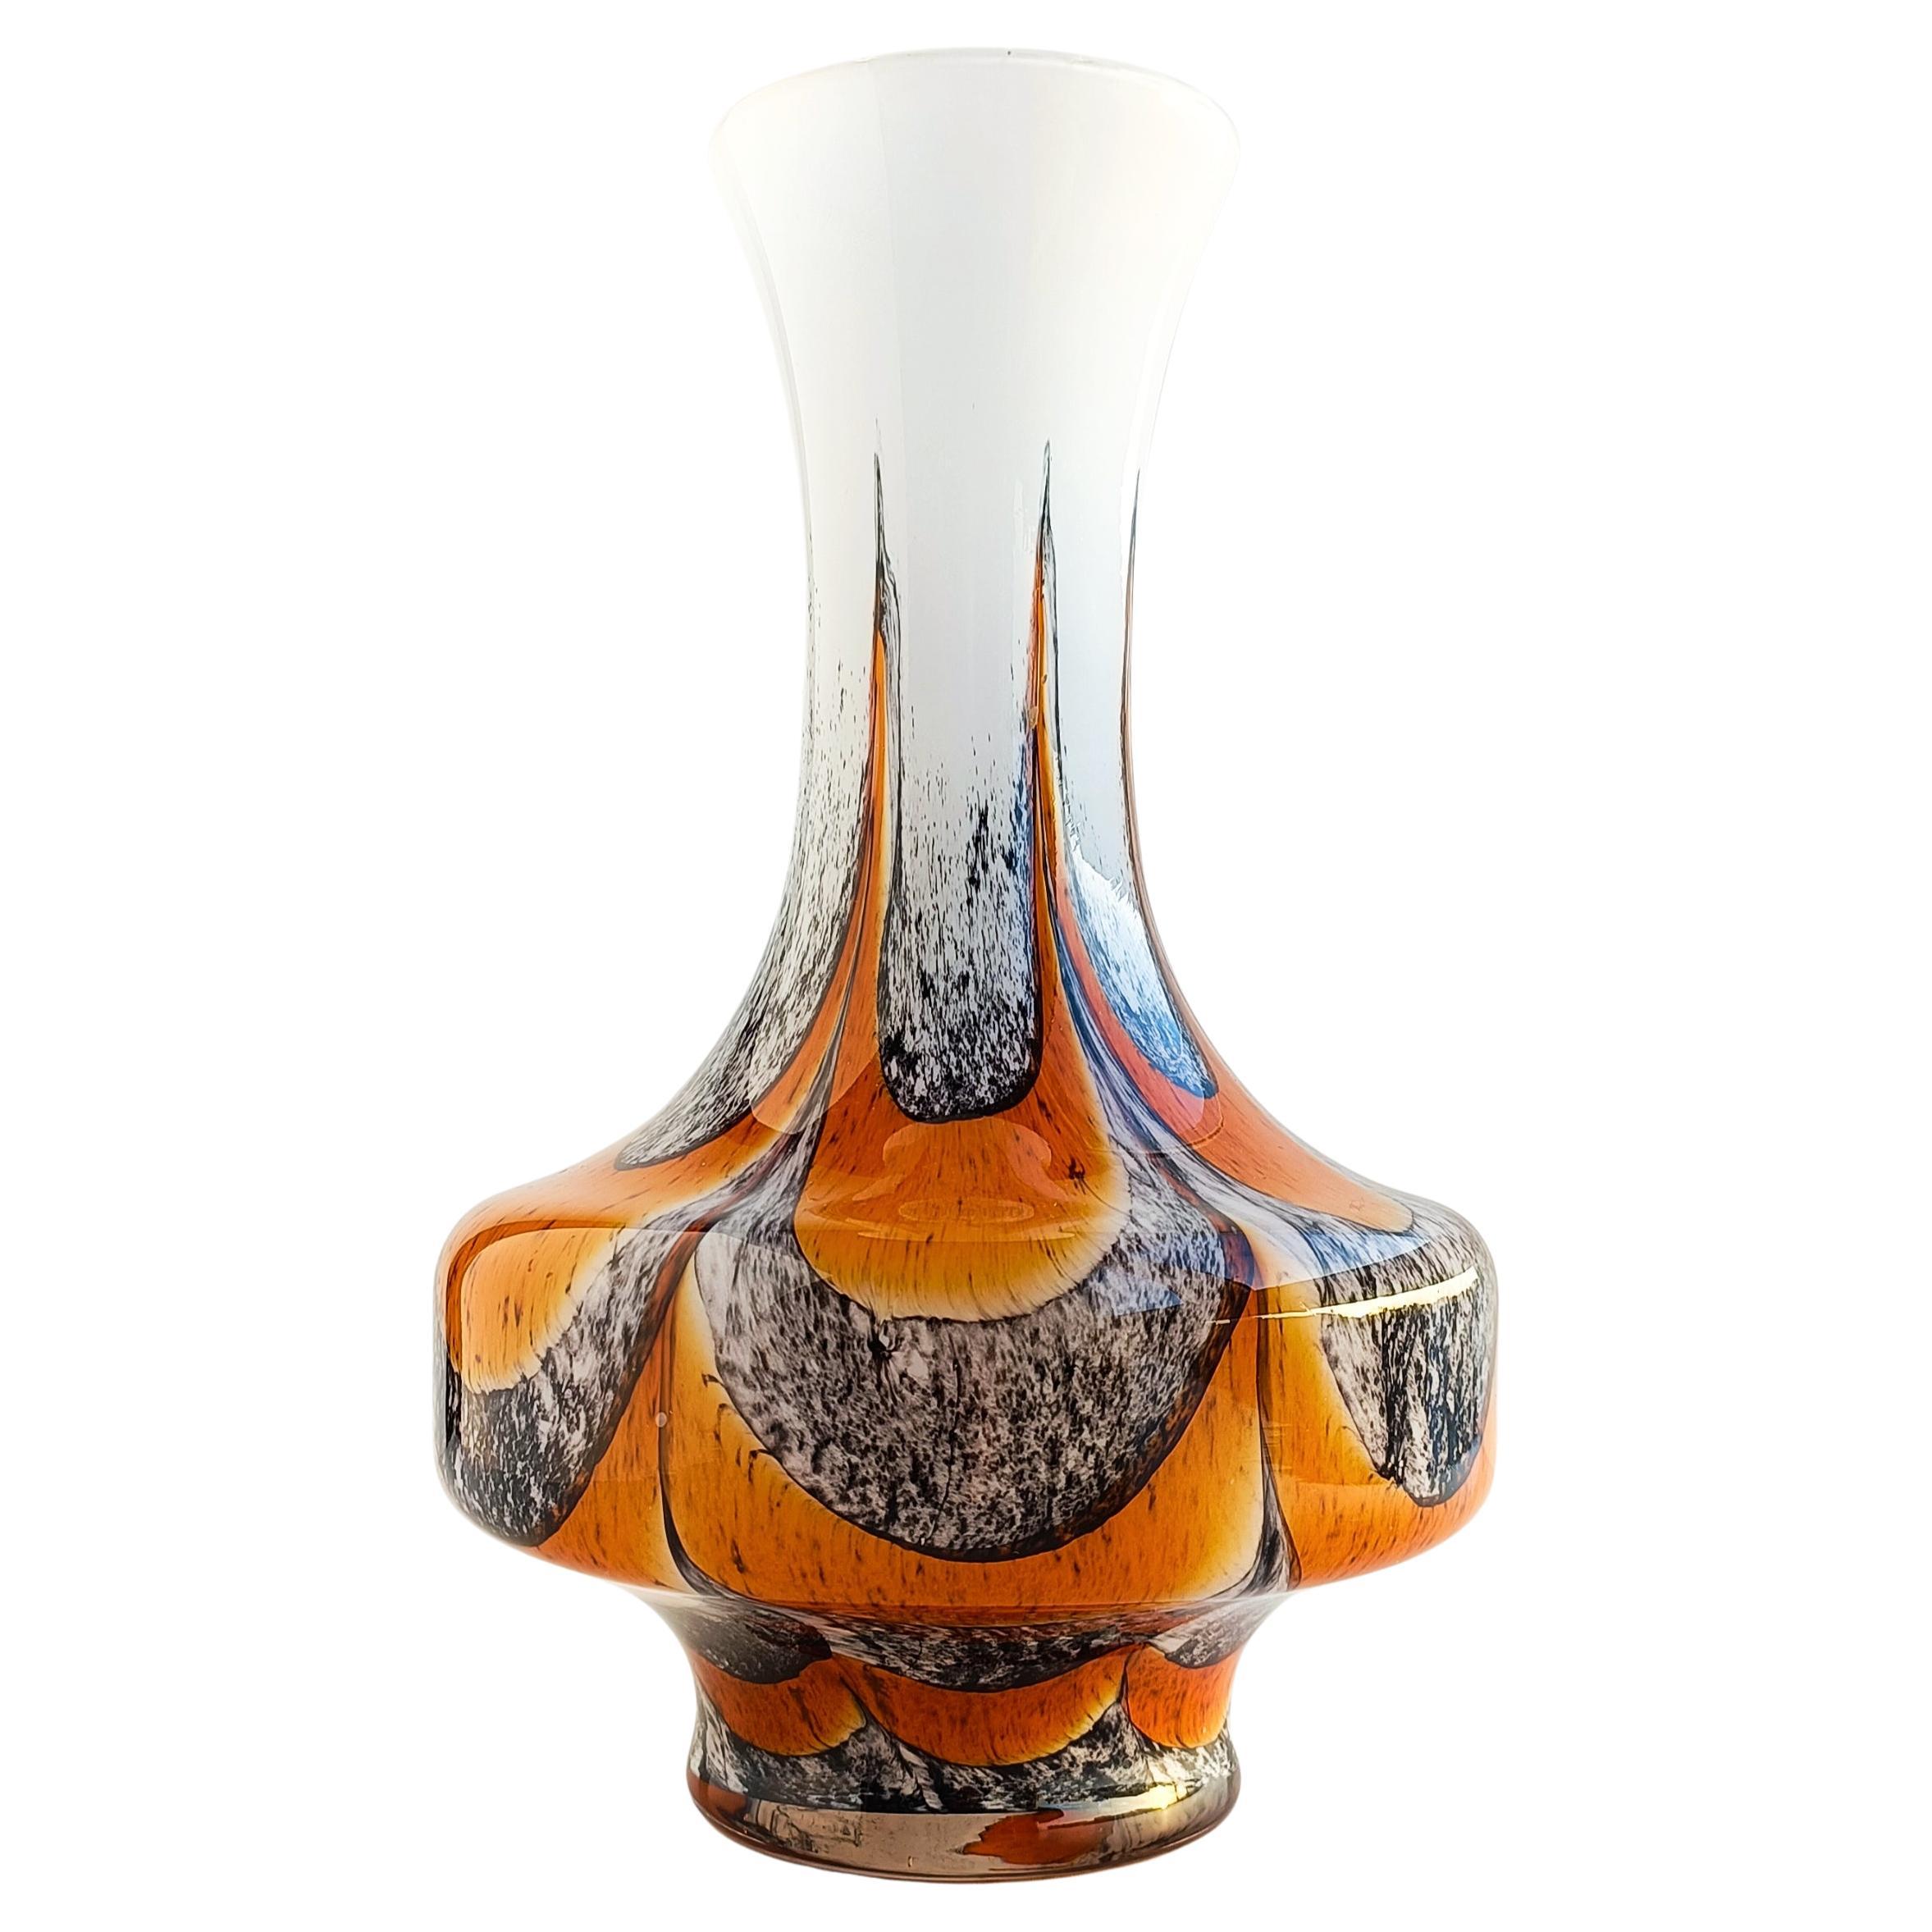 This Opalina Florentina art glass vase by Venetian glass artist Carlo Moretti indeed represents an iconic blend of classical marbled decor and futuristic Space Age design. The Opalina Florentina series gained popularity during the 1960s and 1970s